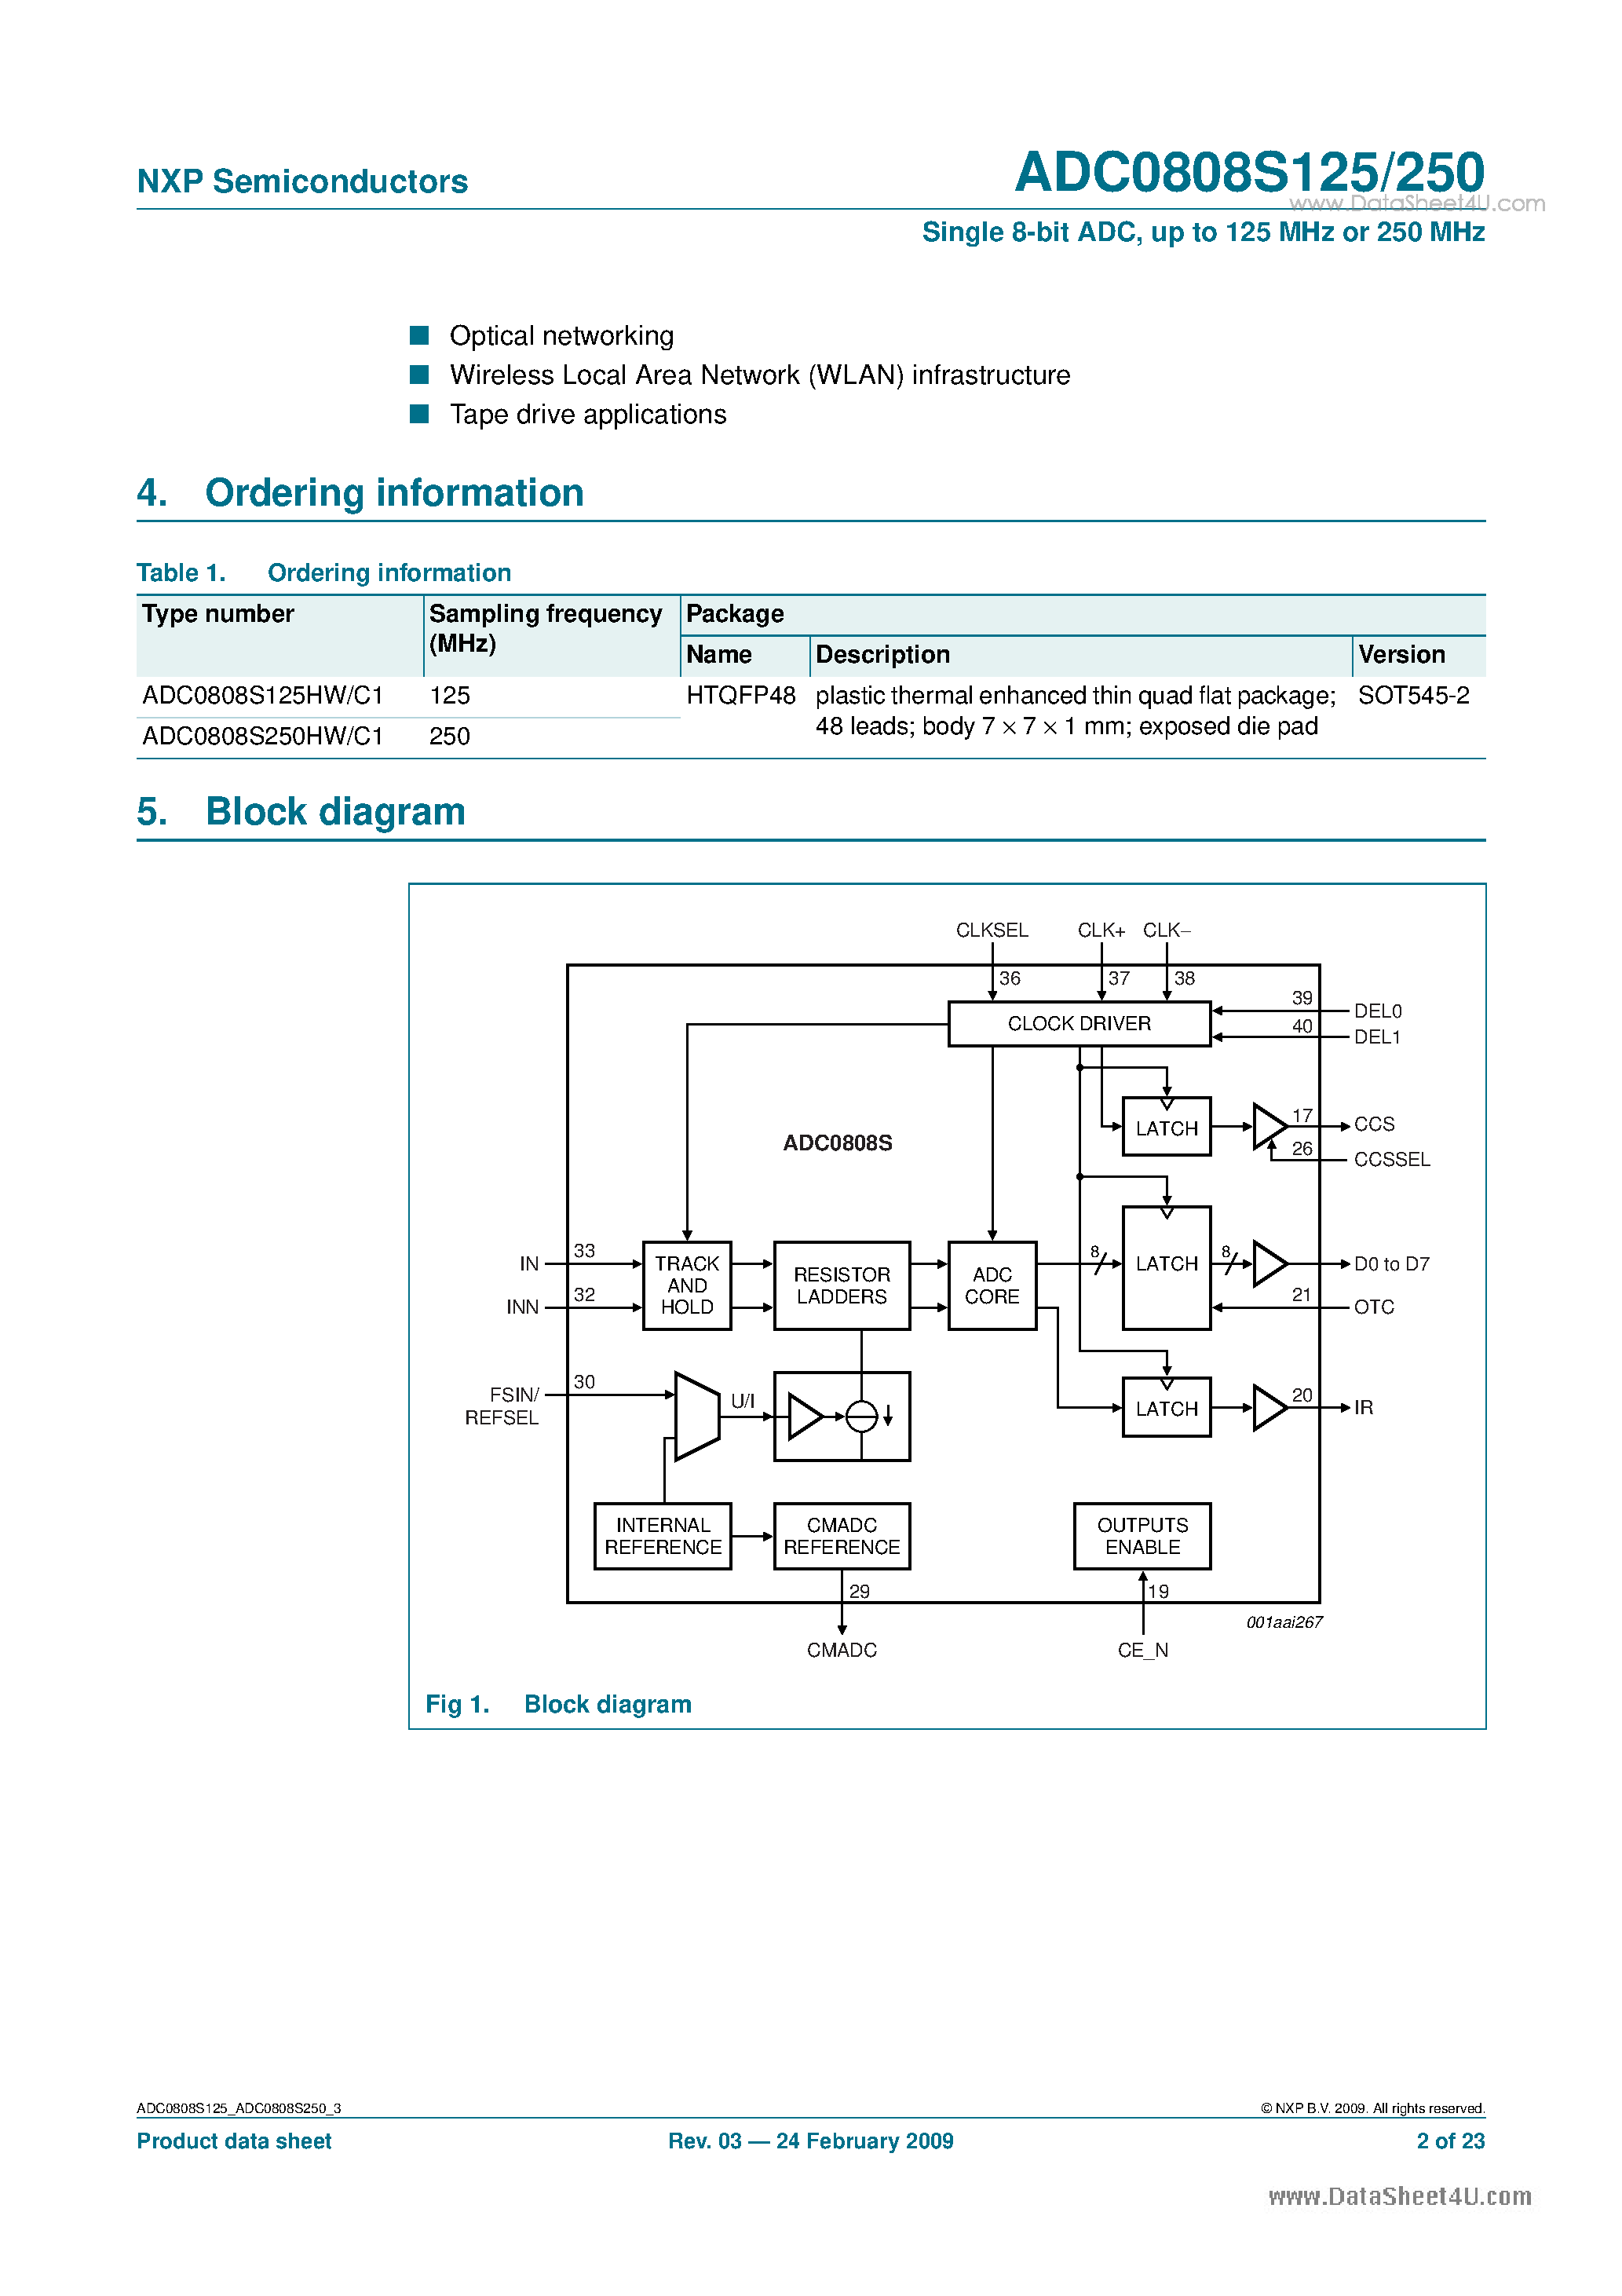 Datasheet ADC0808S125 - (ADC0808S125 / ADC0808S250) Single 8-bit ADC page 2